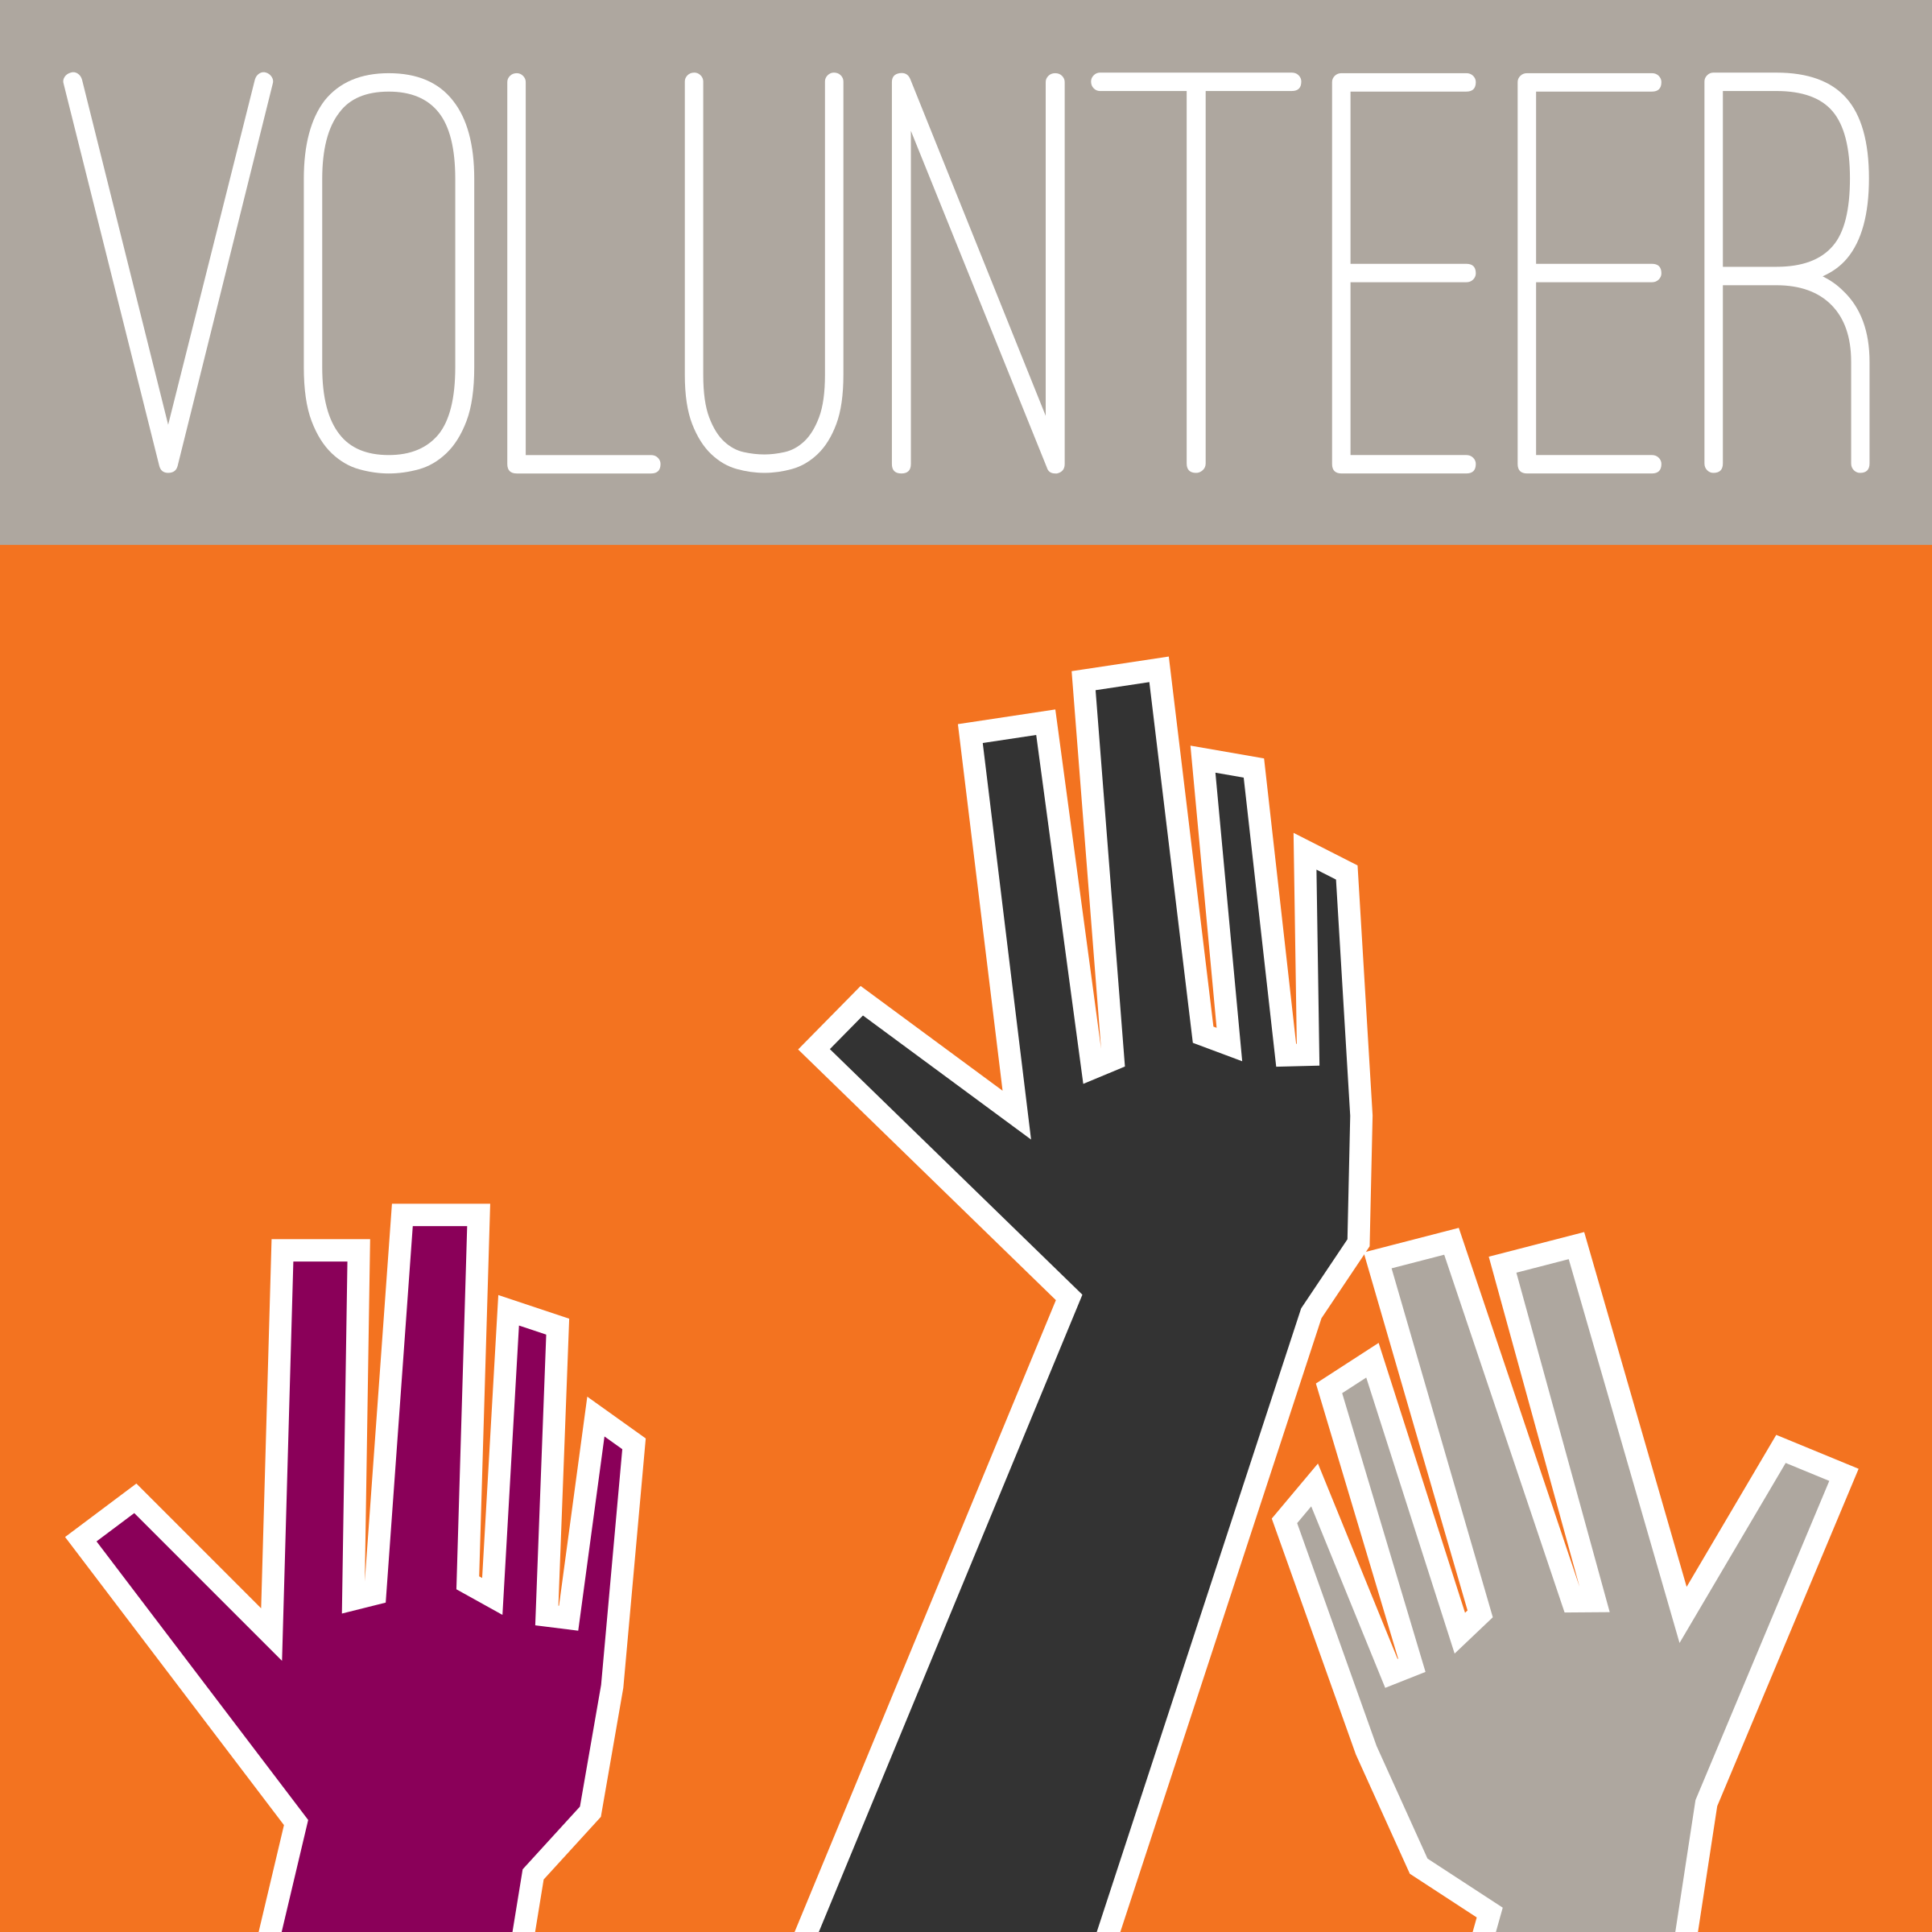 free clipart images volunteers - photo #27